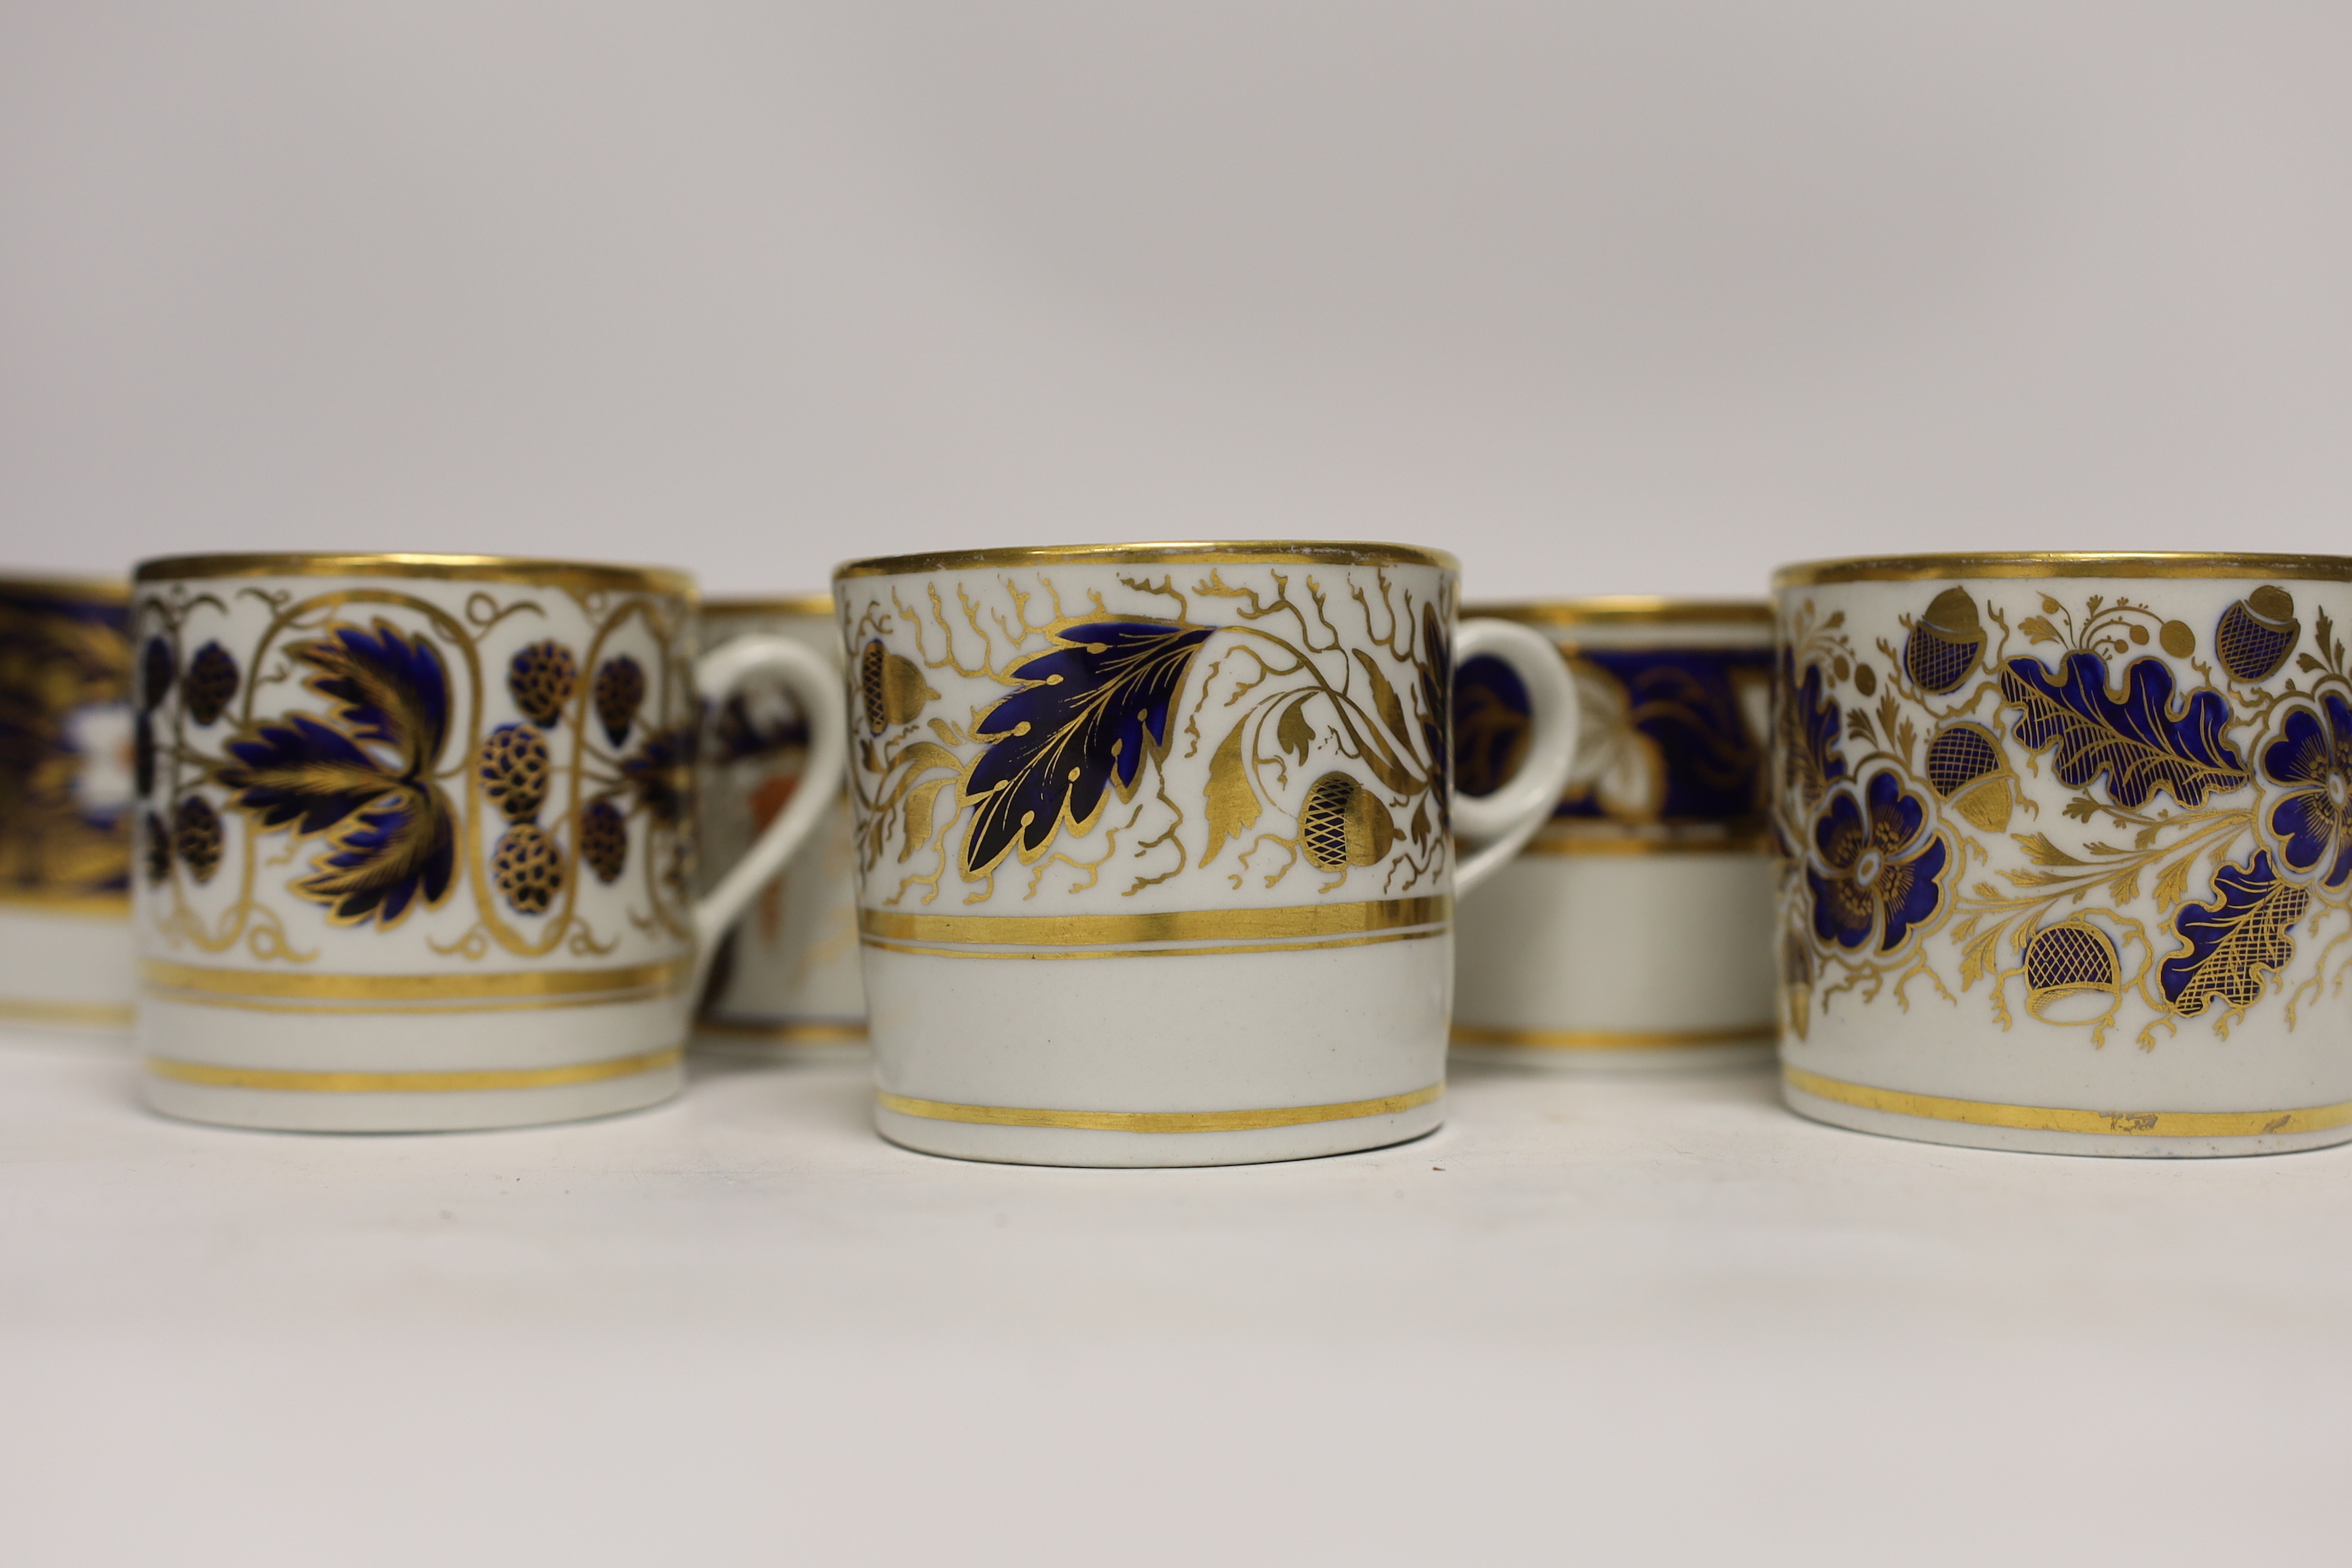 Twelve 1800-1820 English porcelain, mostly blue and gilt decorated coffee cans